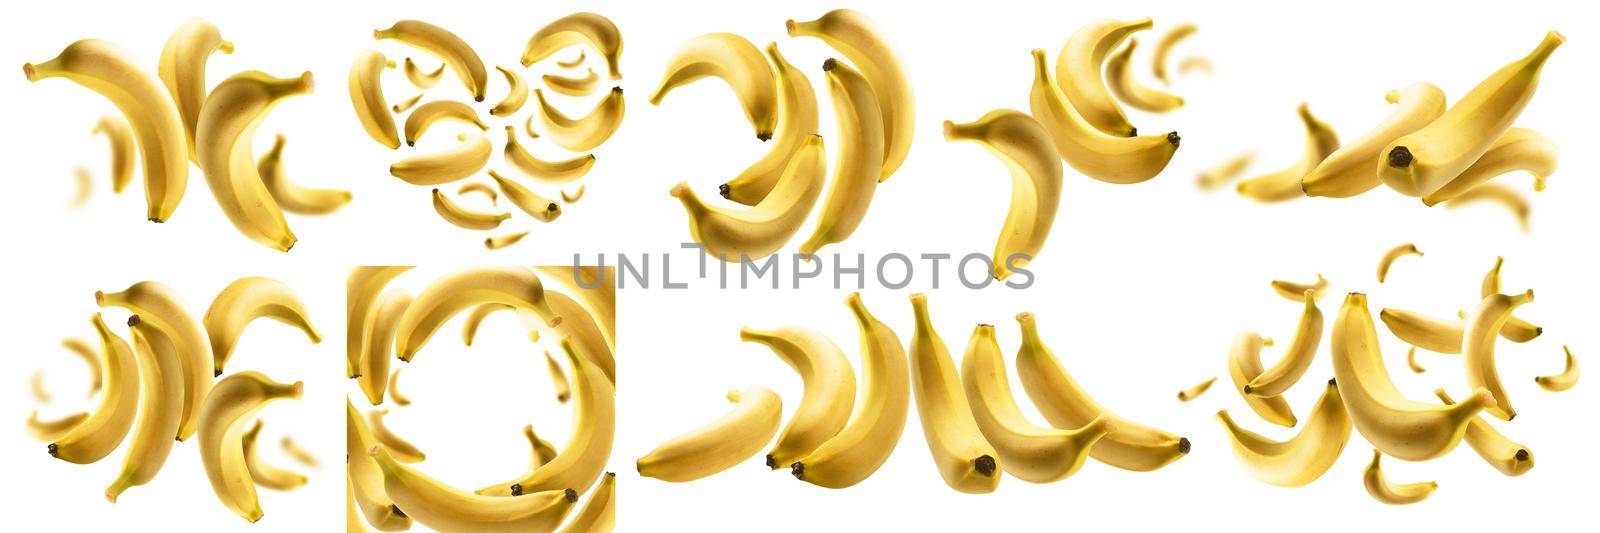 A set of photos. Yellow bananas levitate on a white background by butenkow